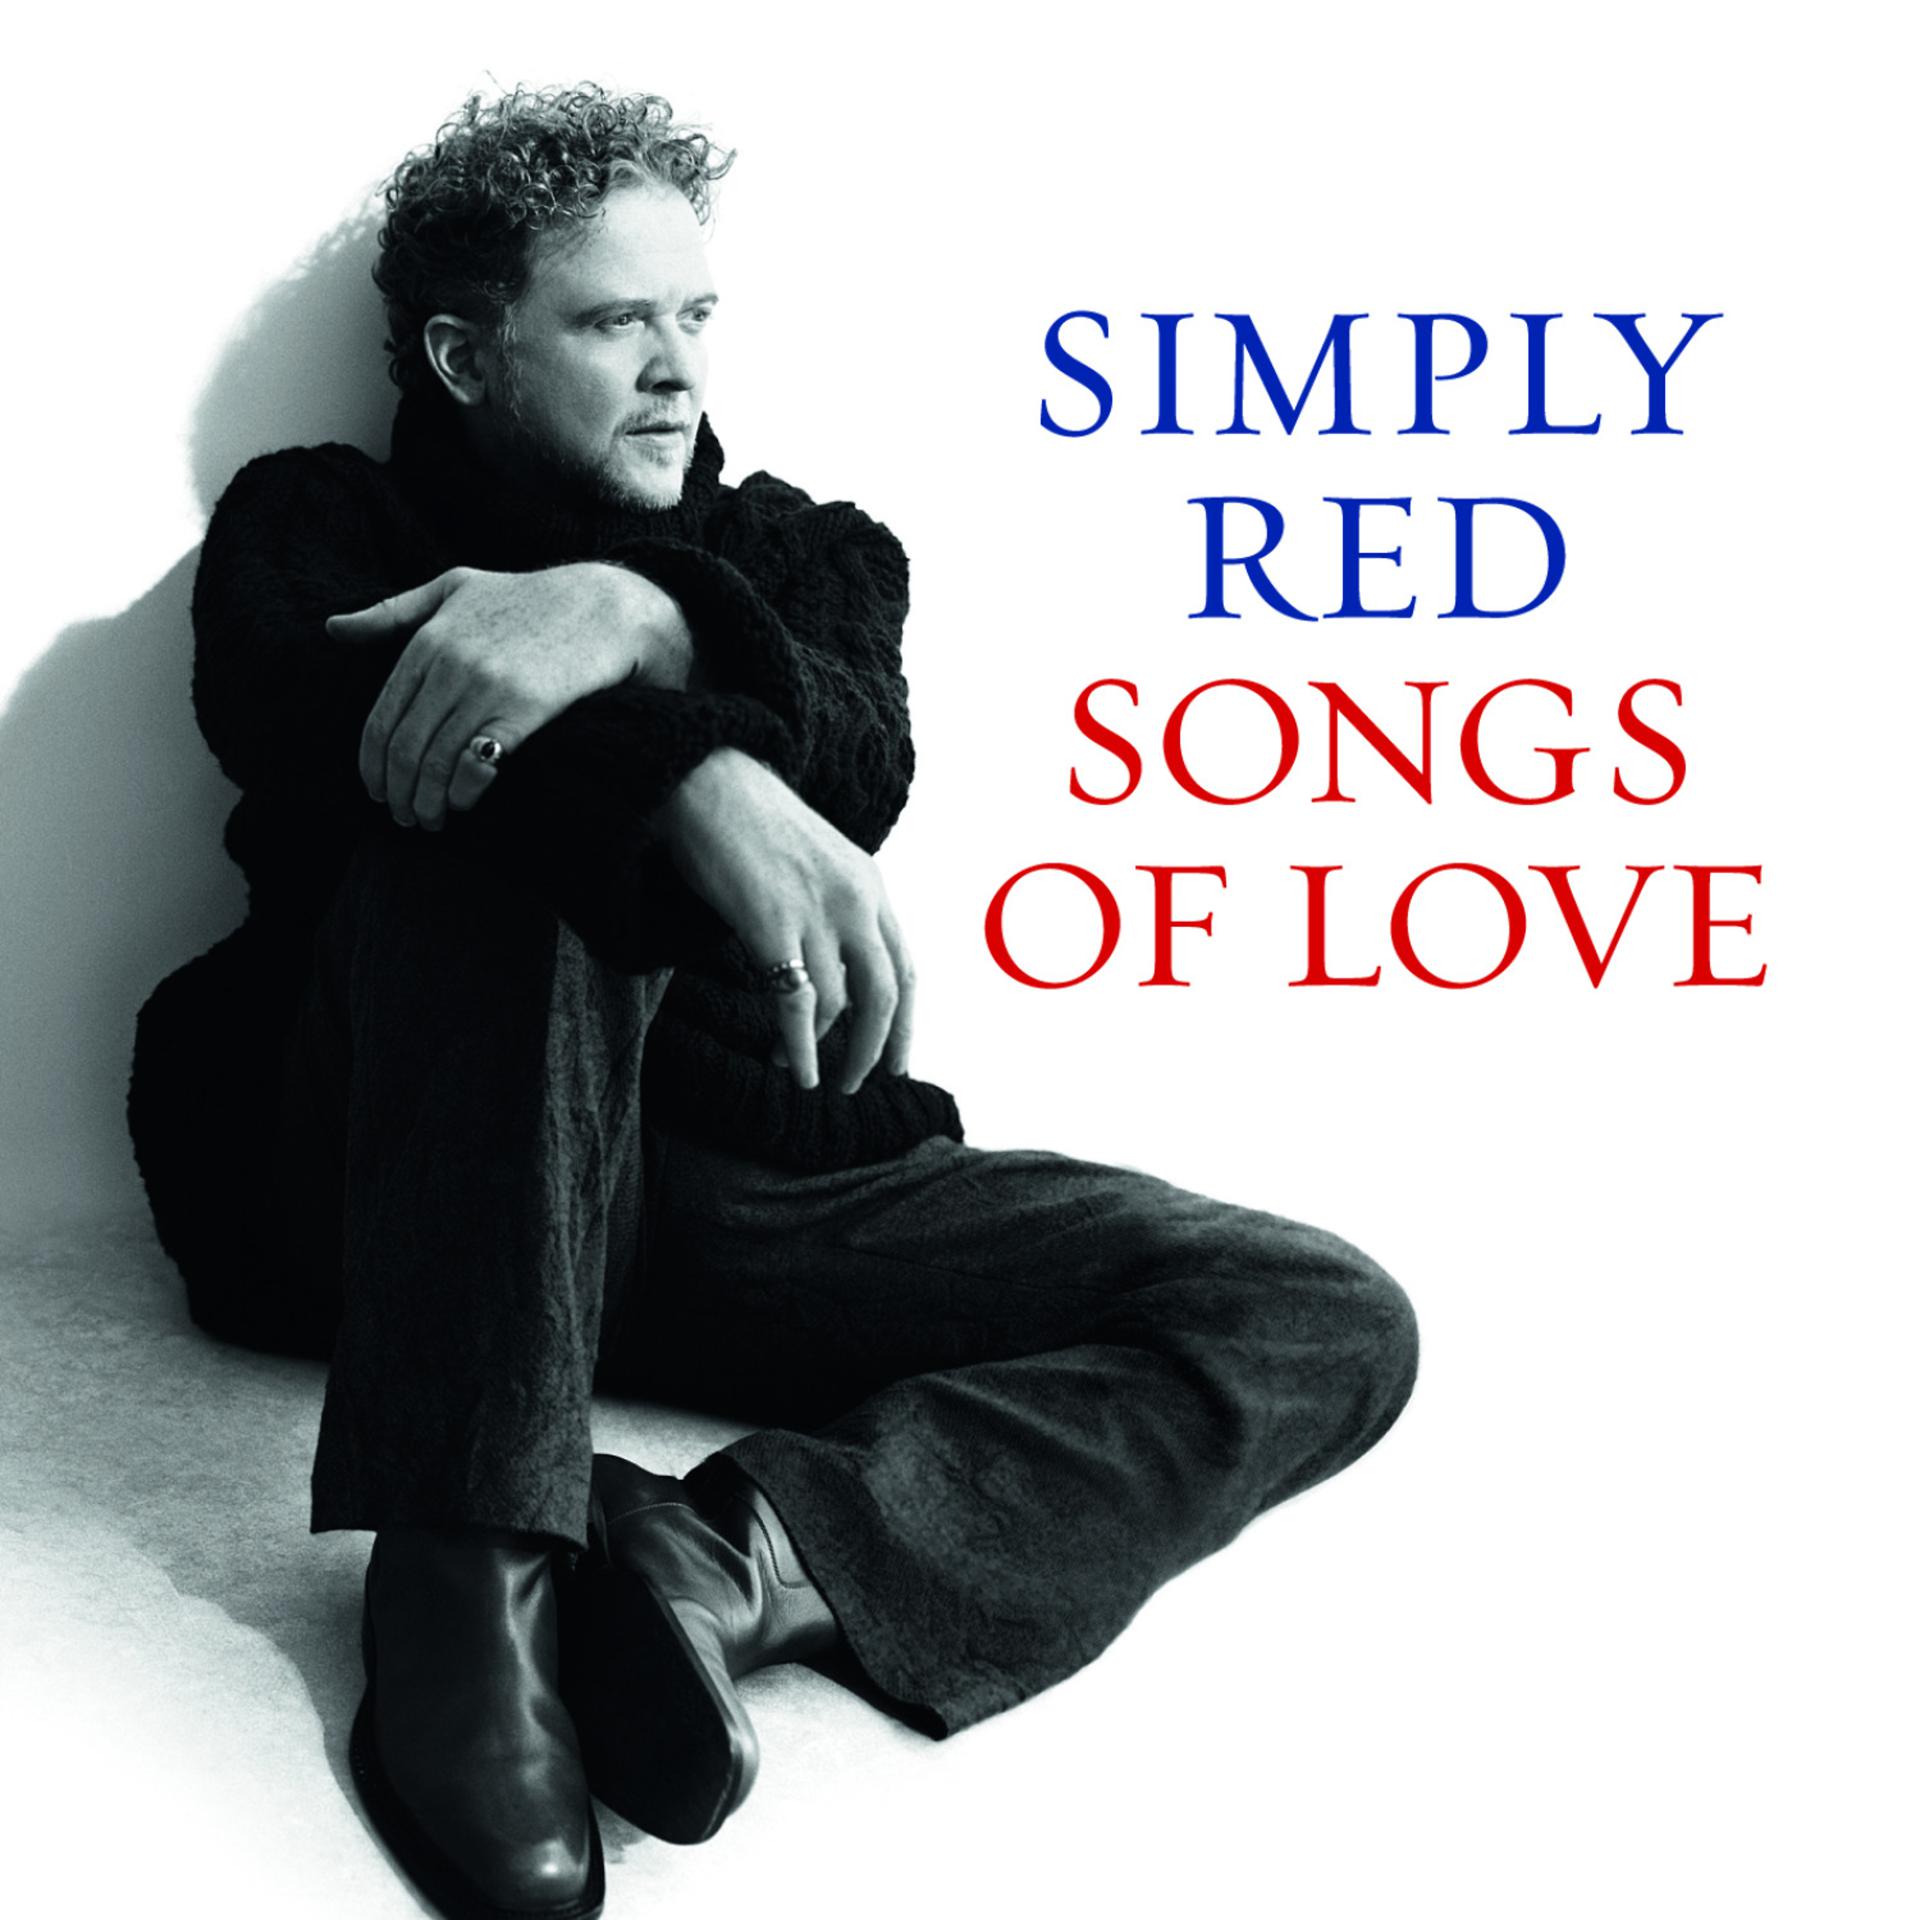 Simply Red. Группа simply Red. Симпли ред альбомы. Simply Red if you don't know me by Now. Simply songs